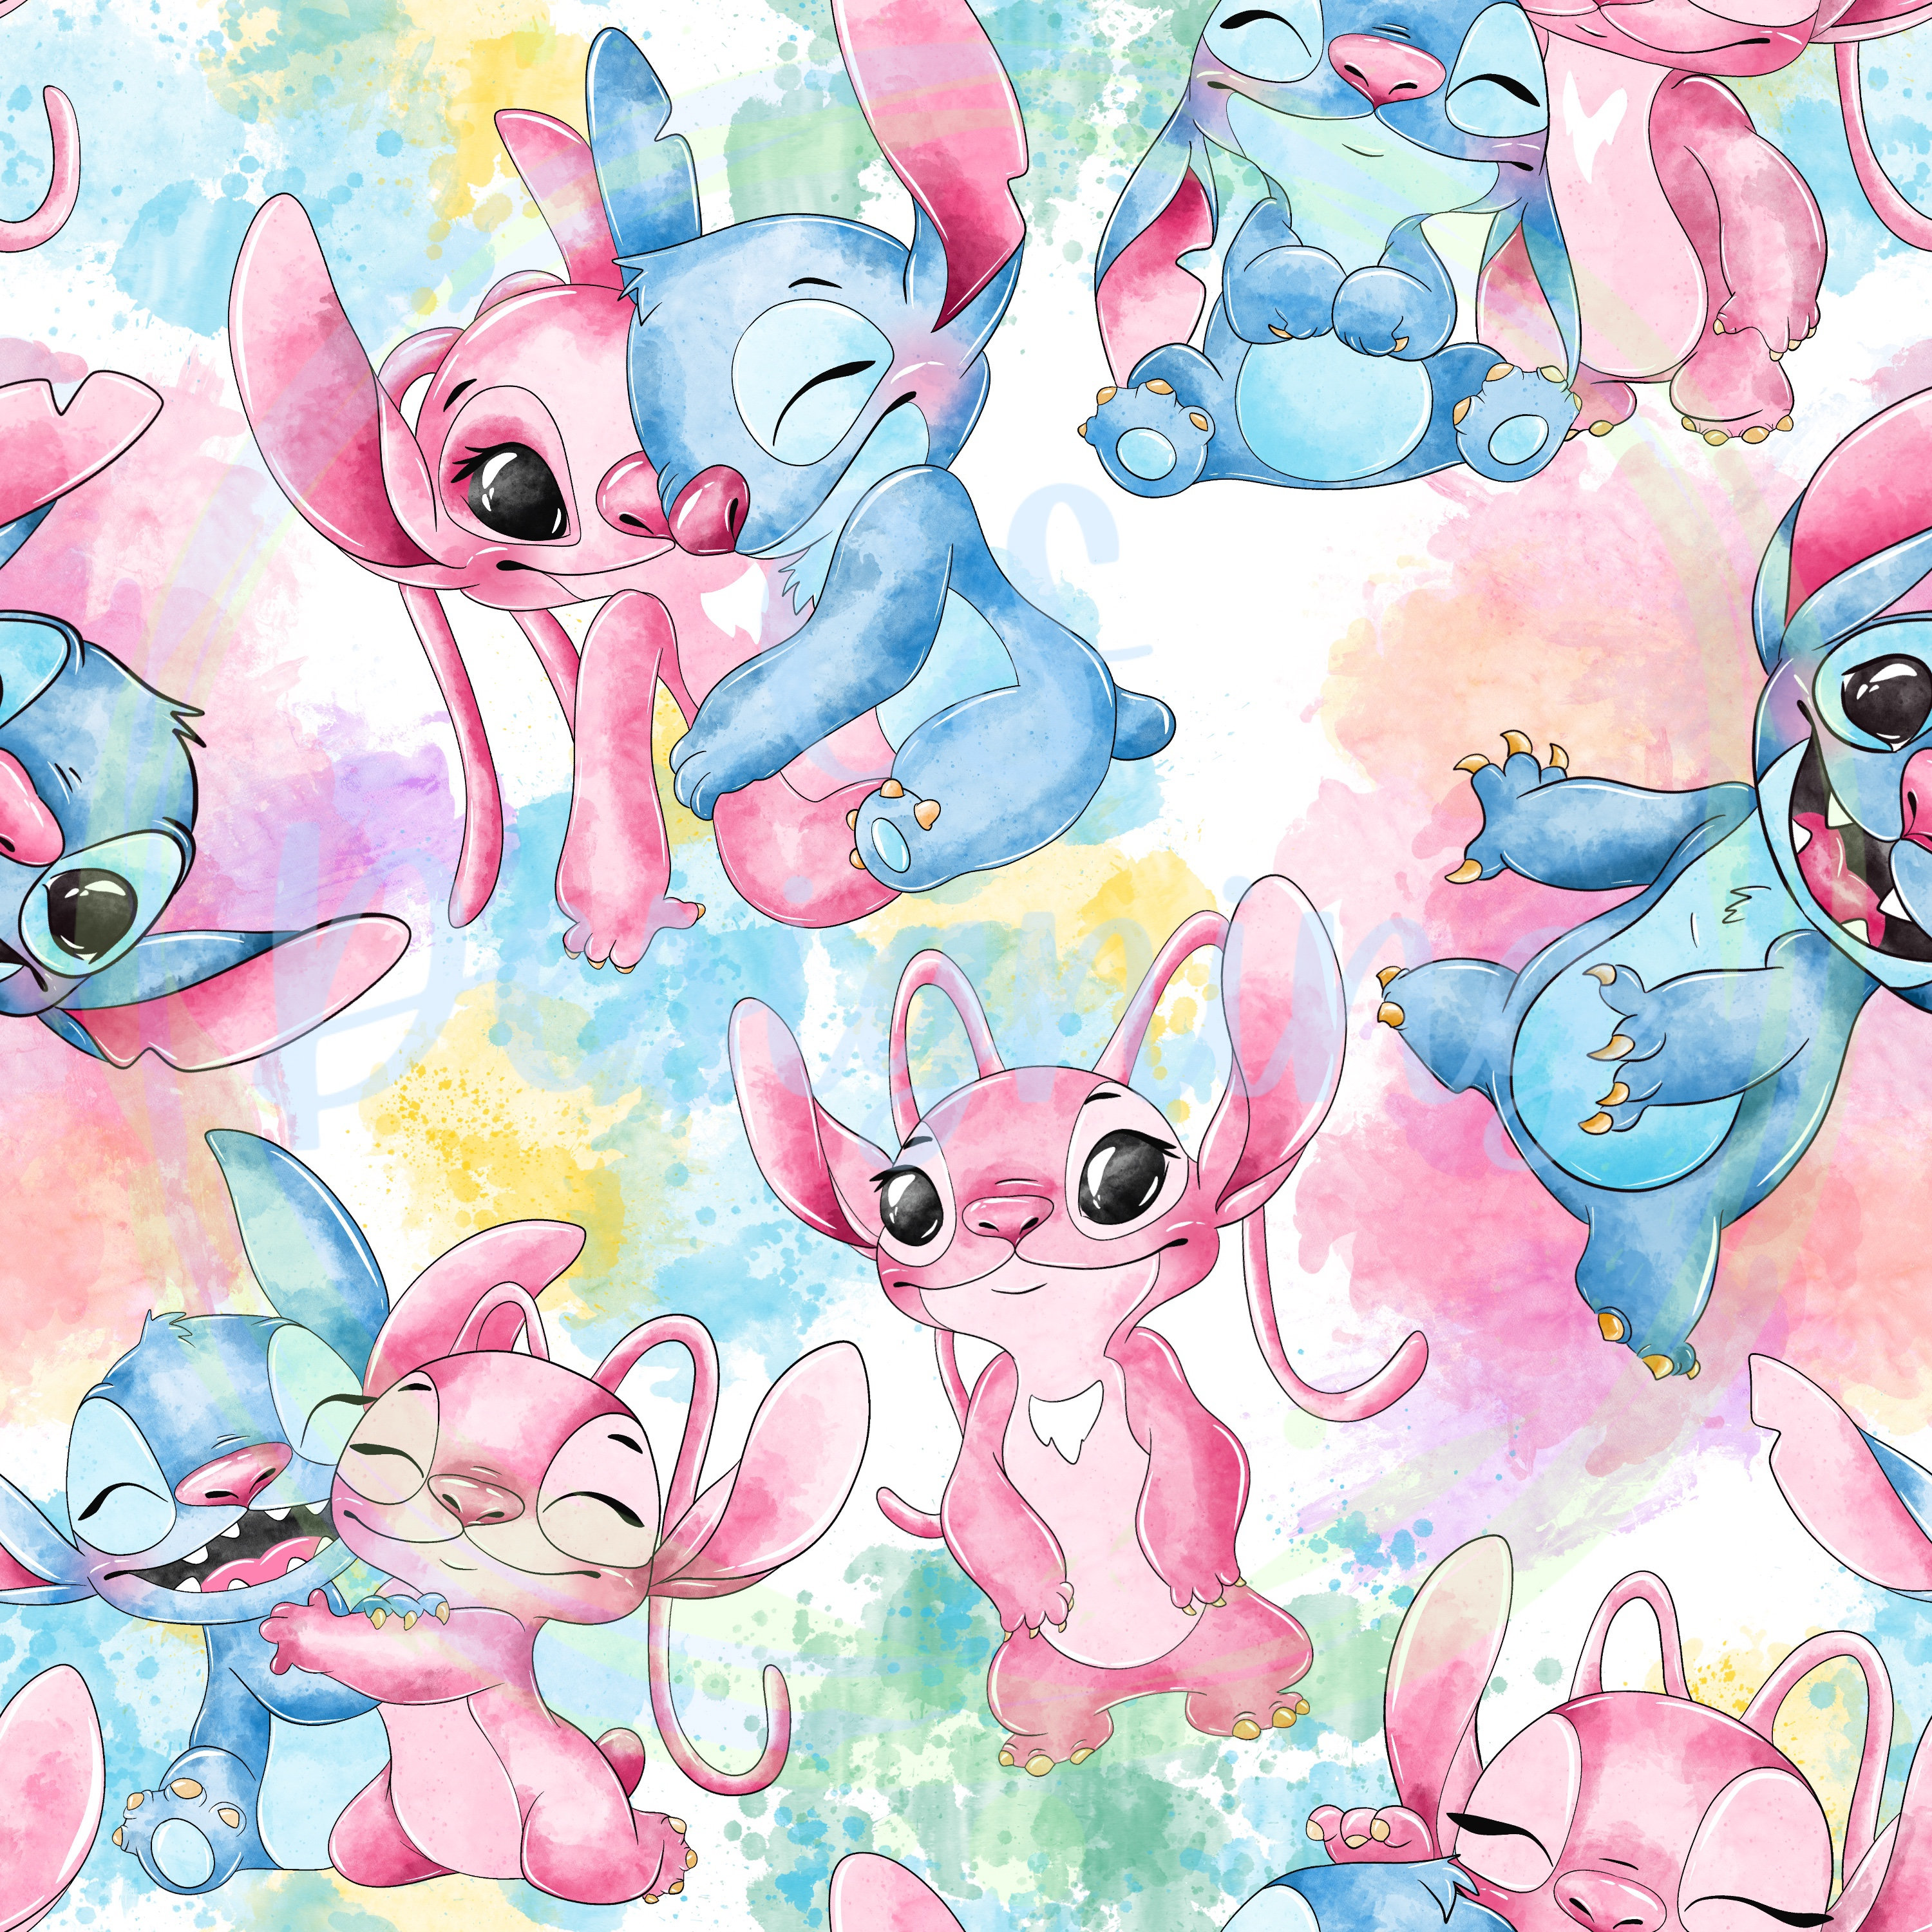 Cool Stitch Wallpapers - Wallpaper Cave